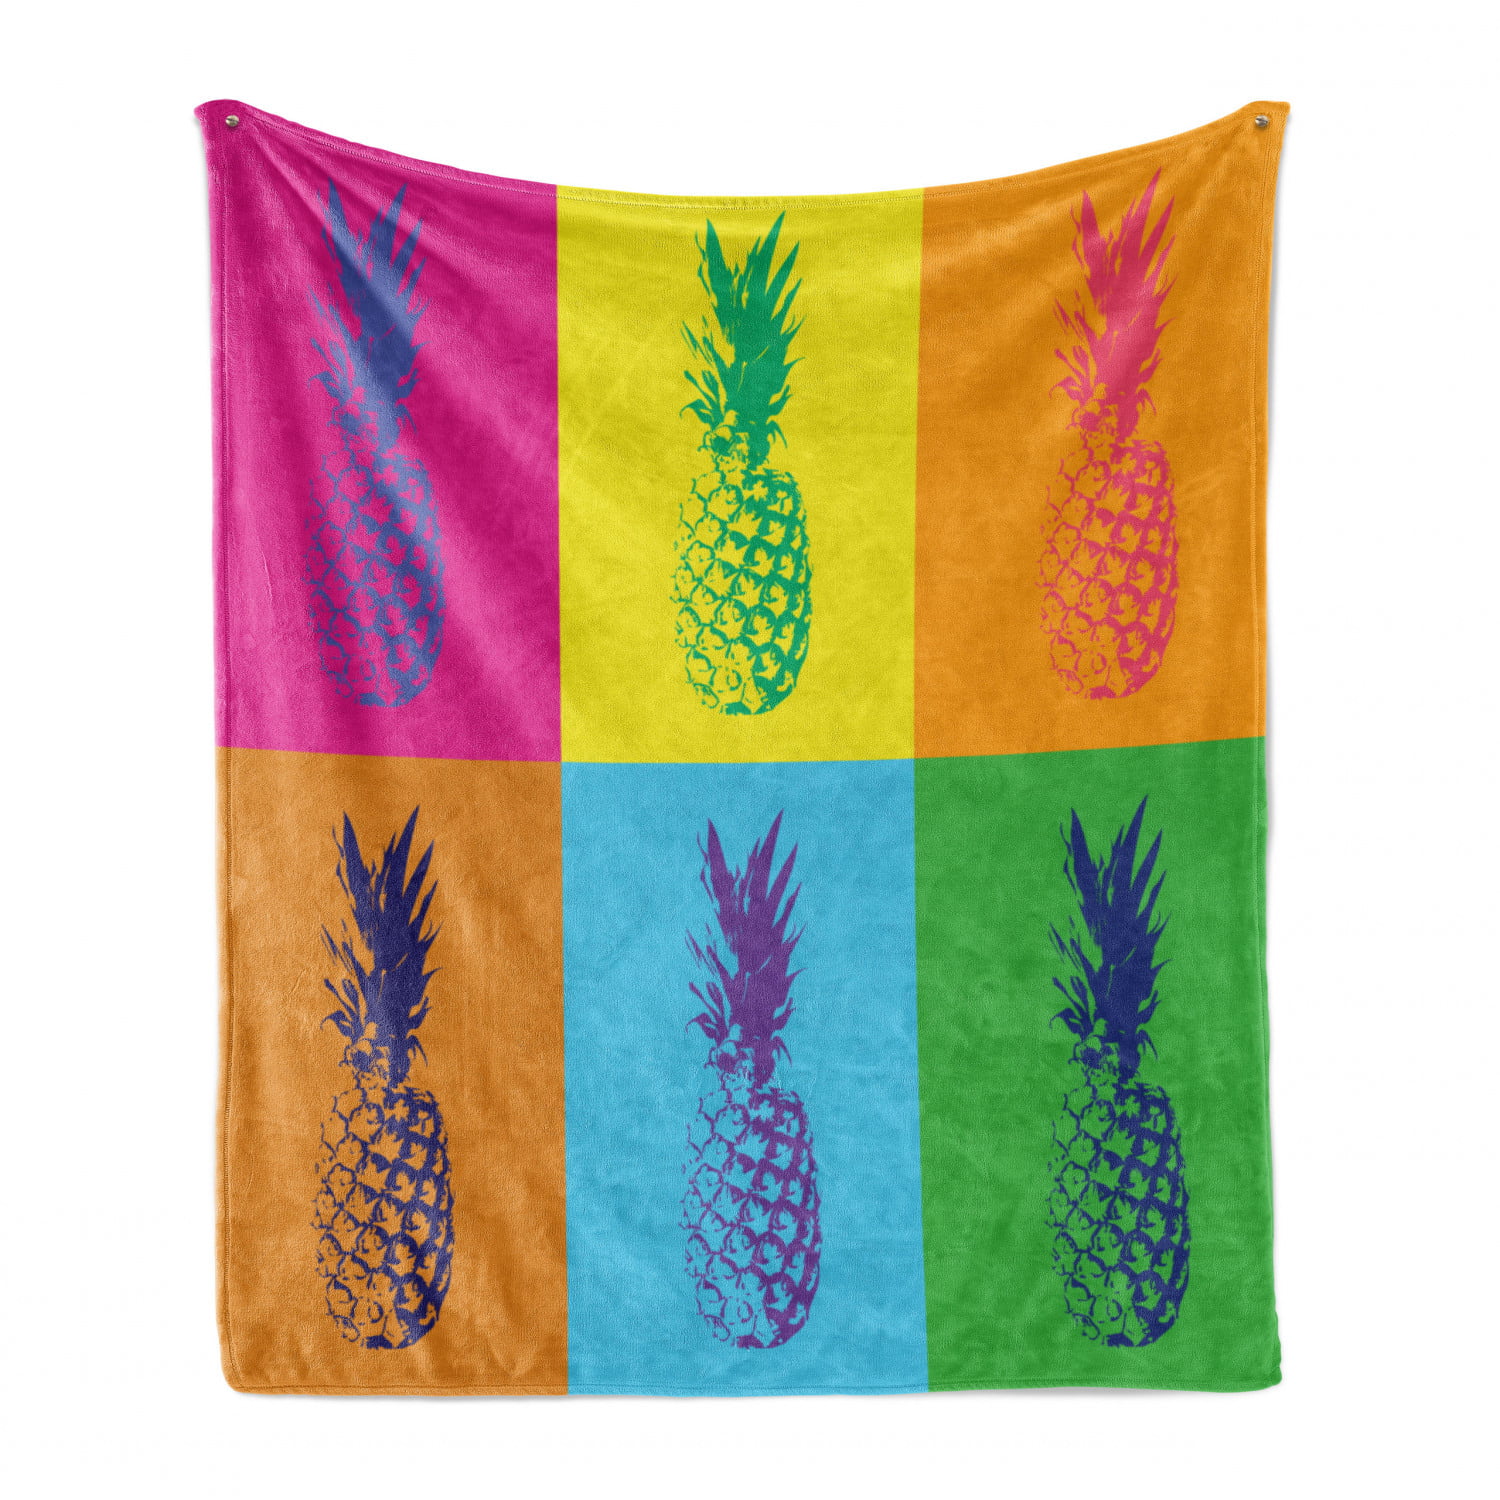 Ambesonne Pineapple Soft Flannel Fleece Throw Blanket 60 x 80 Yellow Orange Cozy Plush for Indoor and Outdoor Use Print of Pop Art Like Ananas Summer Spirit Tone Colors Simplistic Illustration 